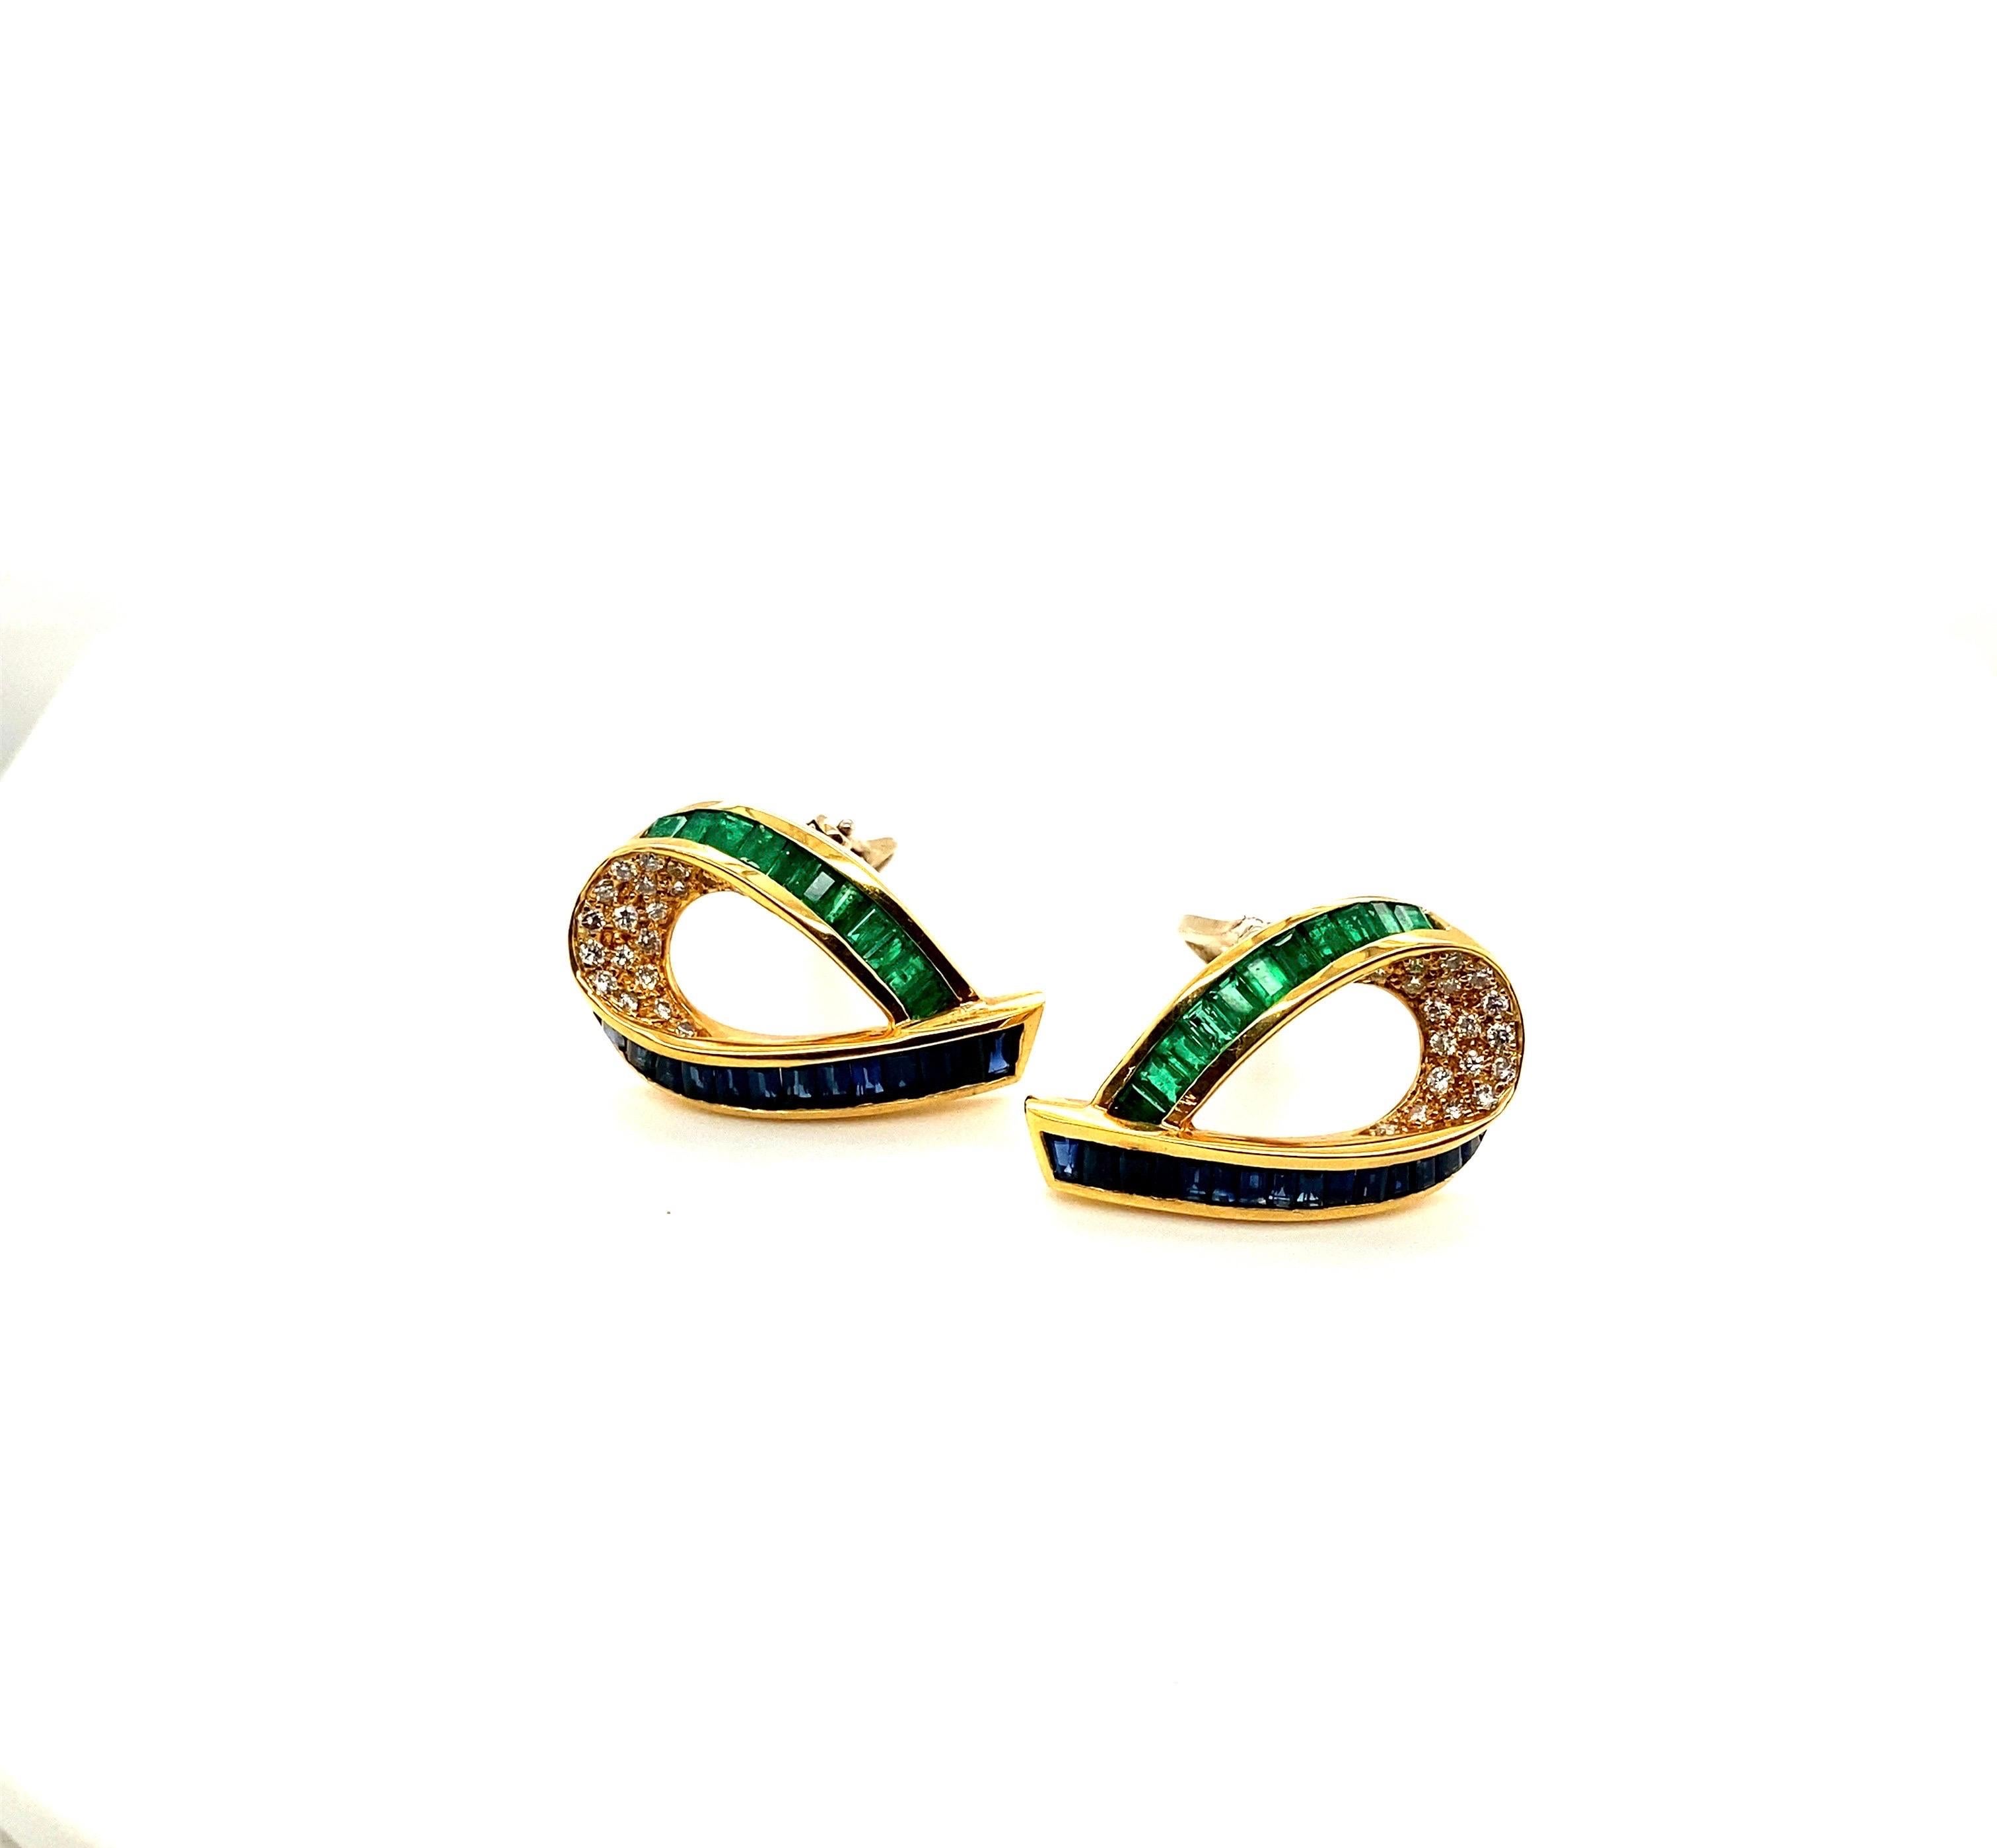 Charles Krypell Jewelry is a New York Based fine jewelry brand that became internationally known for its exquisite use of color, novel designs, and outstanding craftsmanship. These earrings exemplify just that - crafted in 18 karat yellow gold with